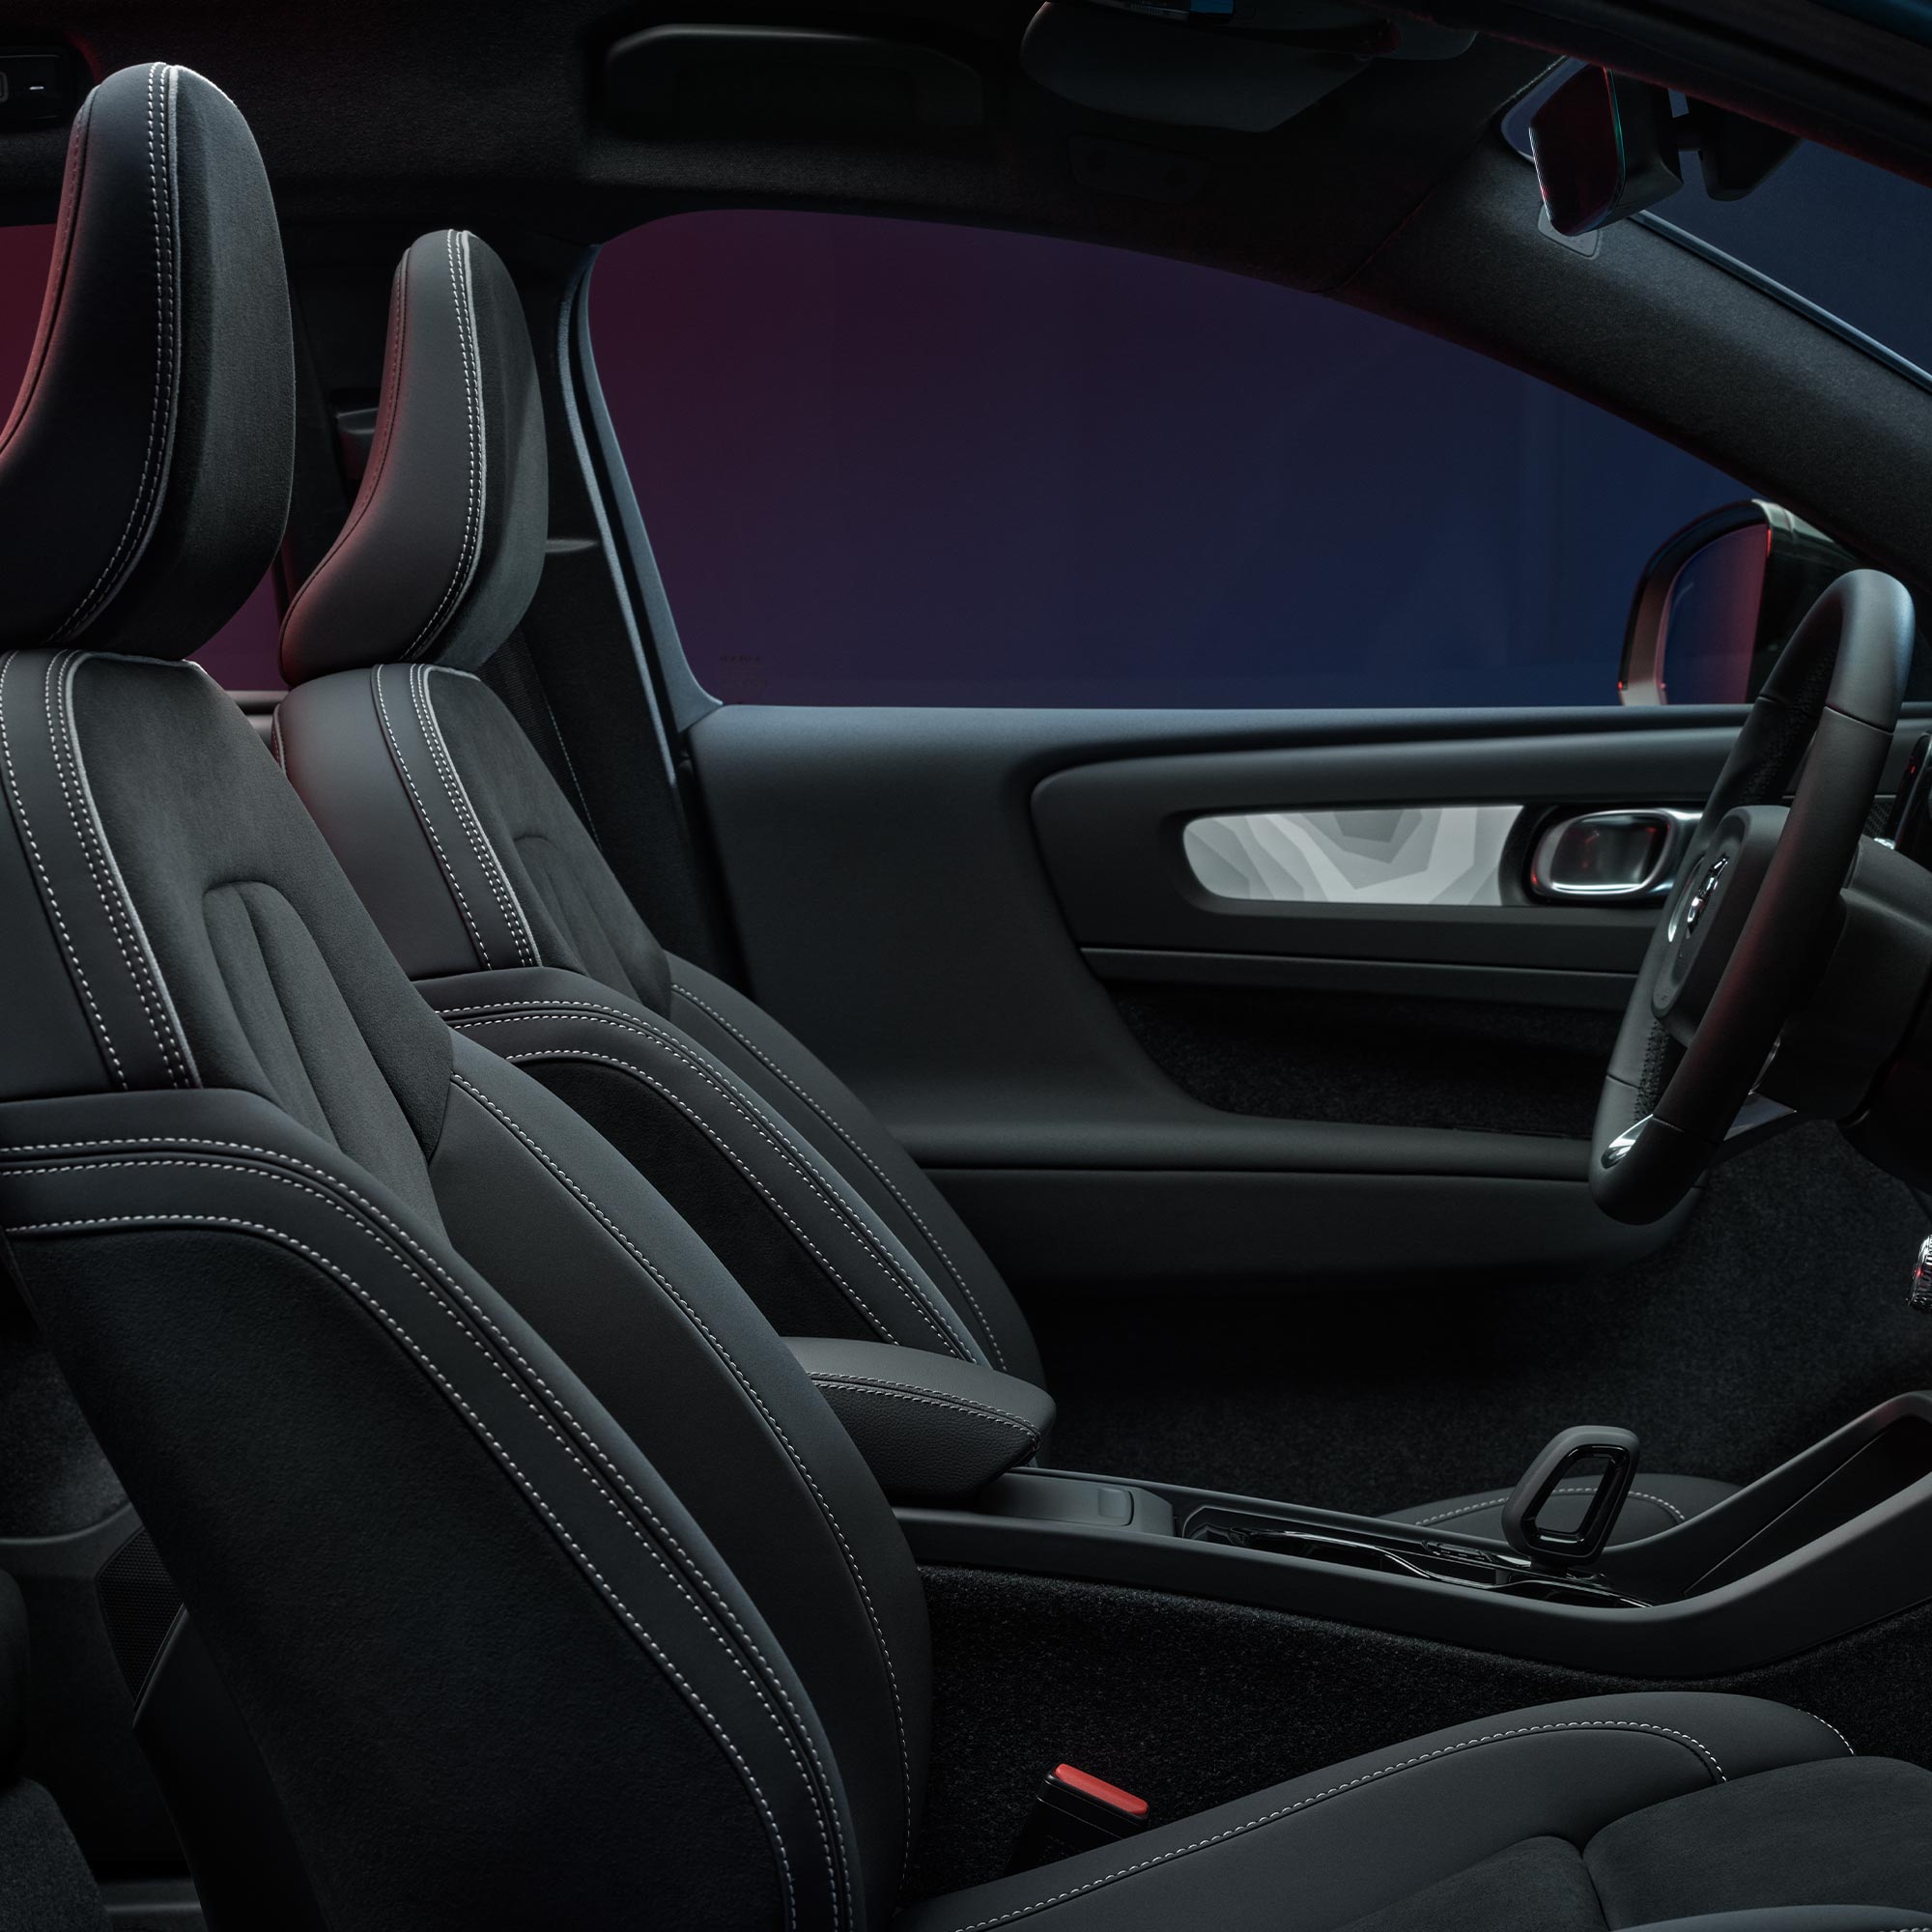 Interior view of the front seats and steering wheel of the Volvo C40 Recharge.